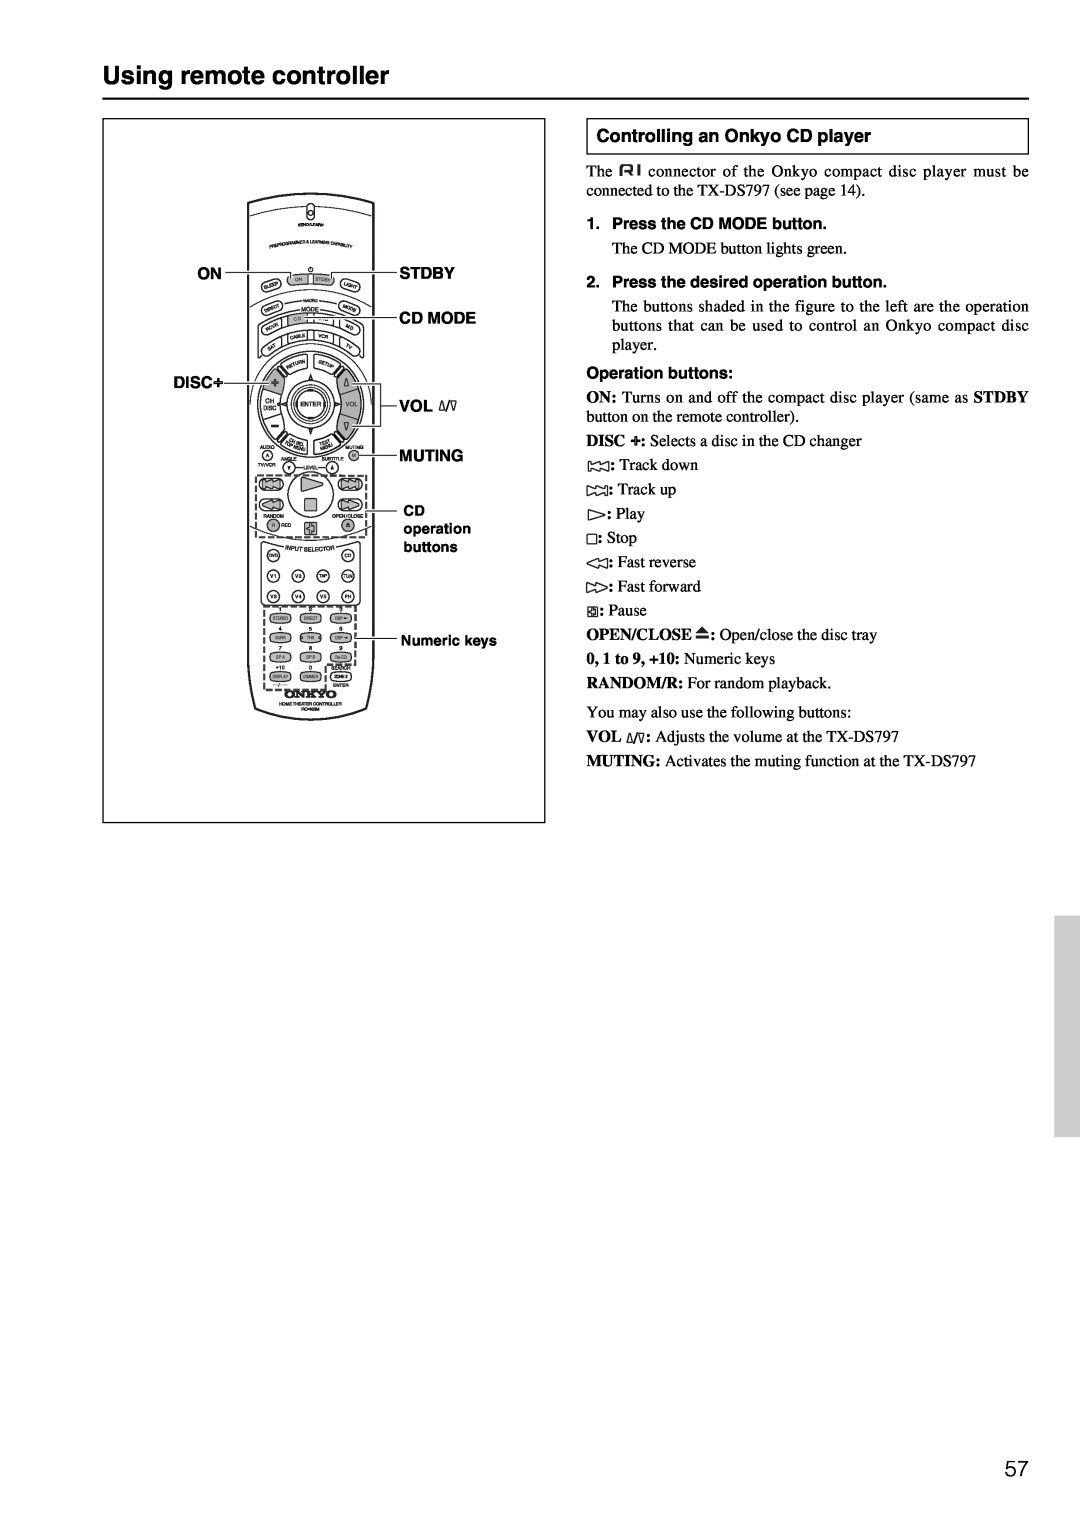 Onkyo TX-DS797 instruction manual Using remote controller, Controlling an Onkyo CD player 